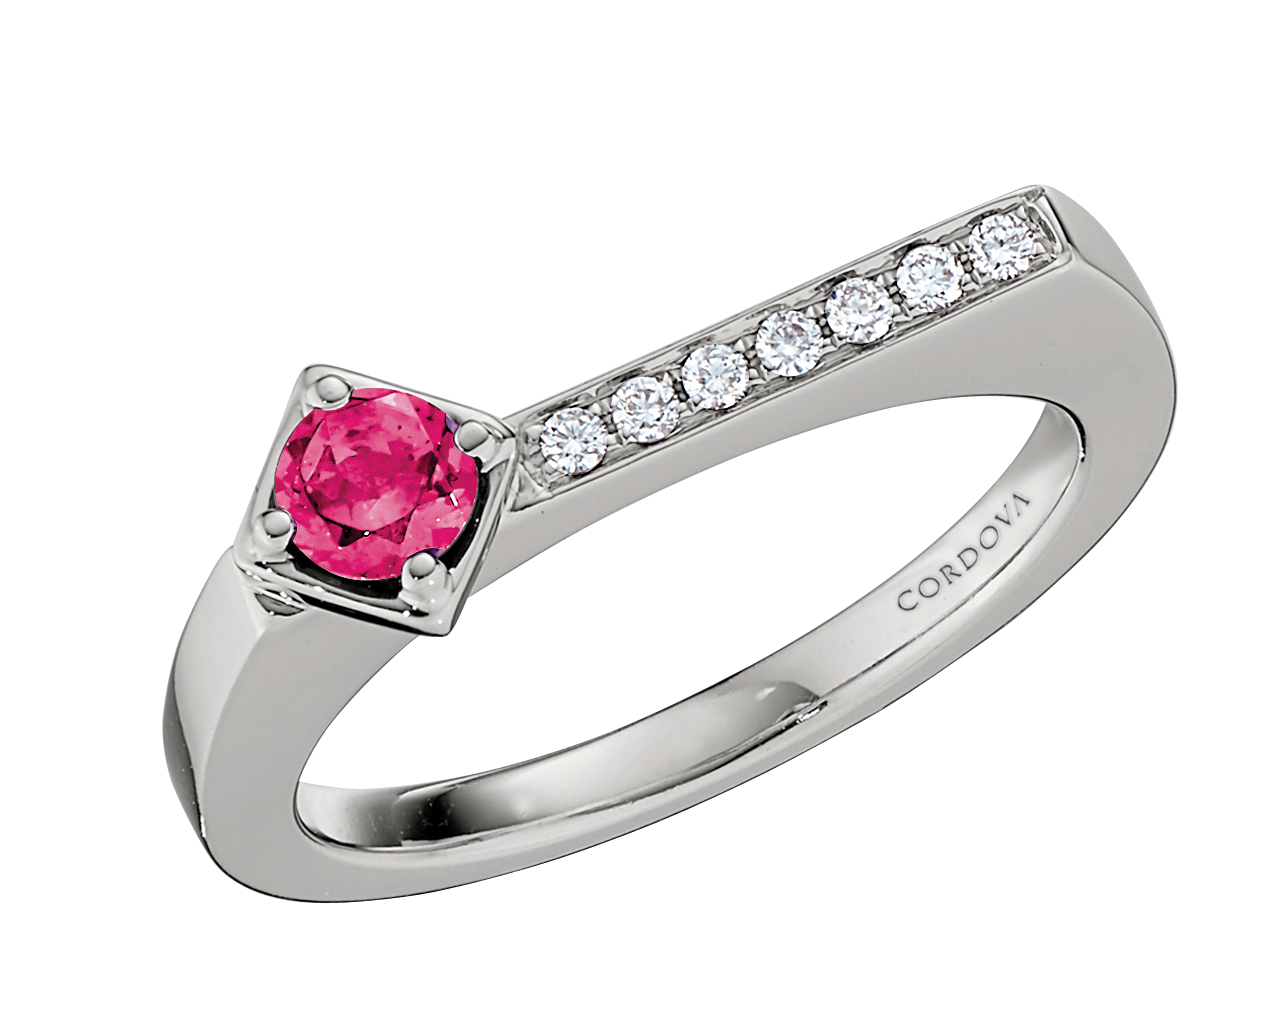 Cordova "Encore" 14kt White Gold Pink Tourmaline Stackable Ring